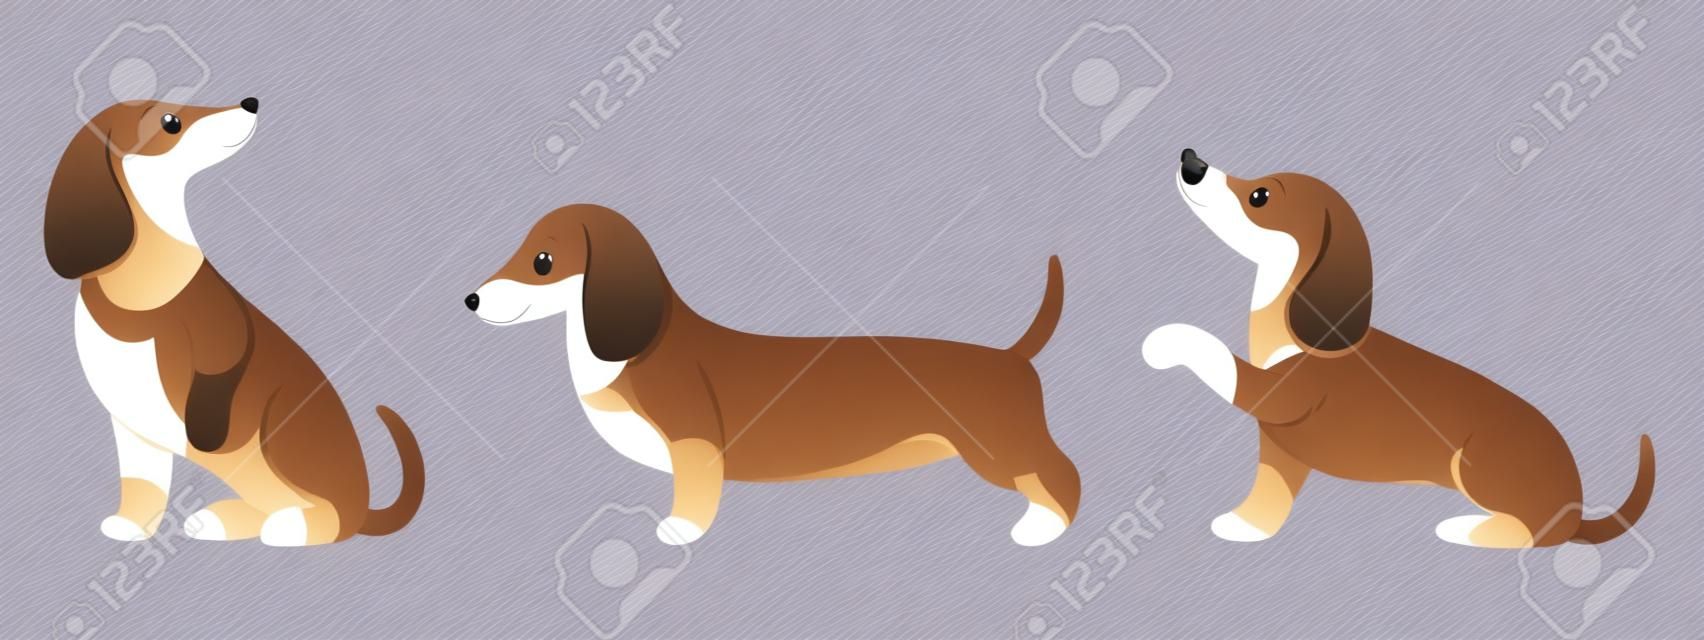 Set of cute purebred dachshunds in different poses. Illustration in cartoon style, vector